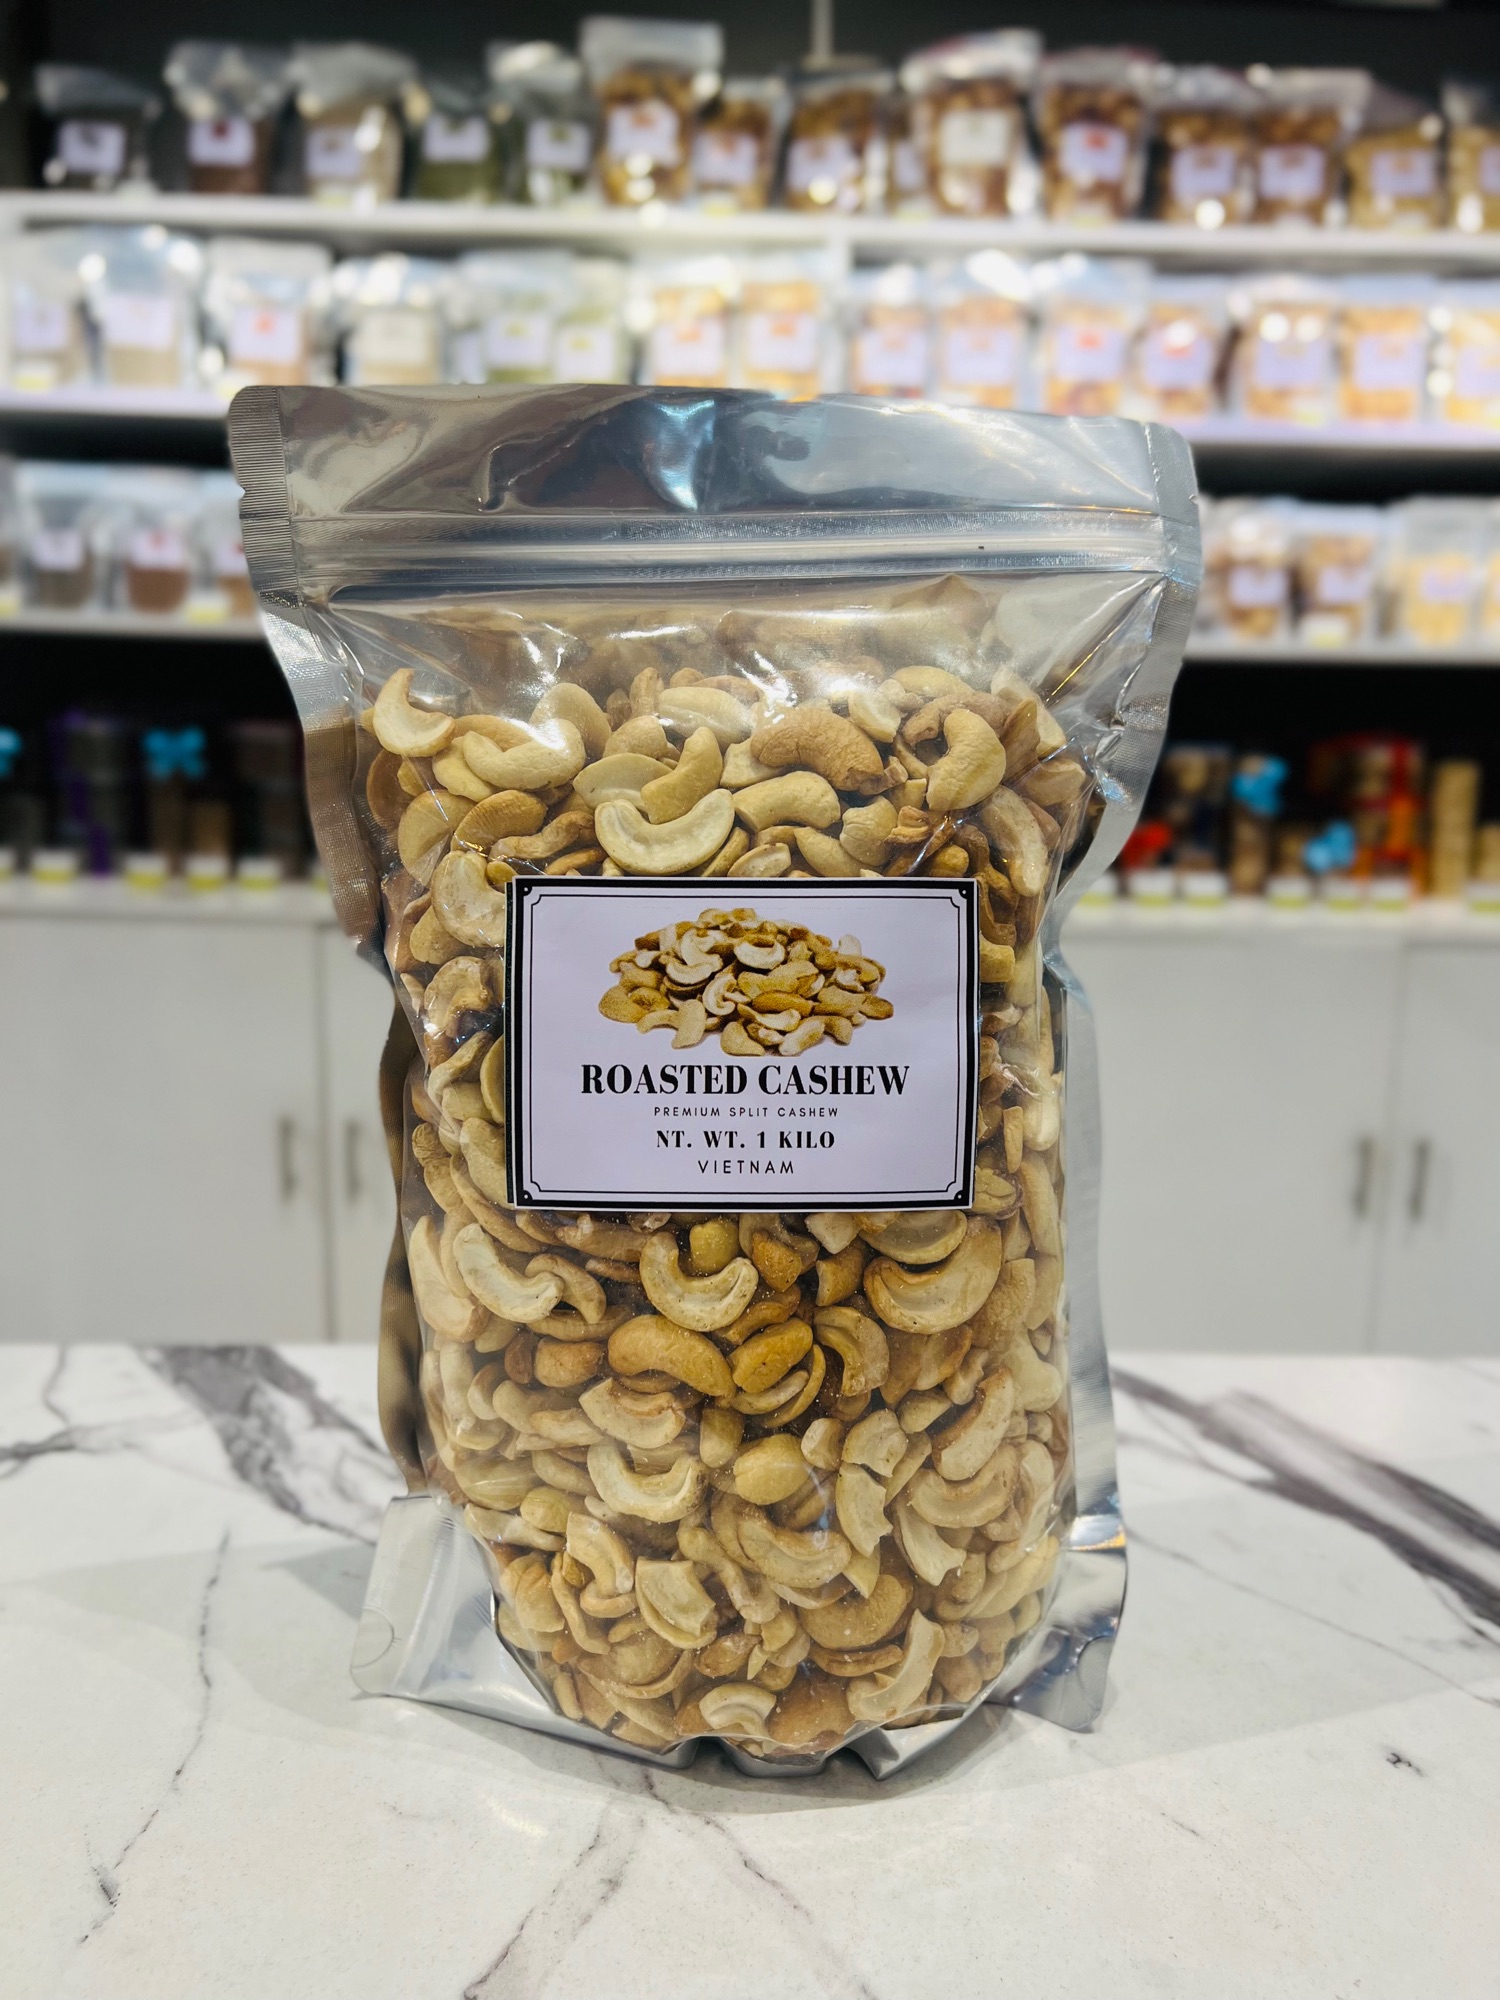 Roasted Cashew nuts 1 kilo - Imported from Vietnam